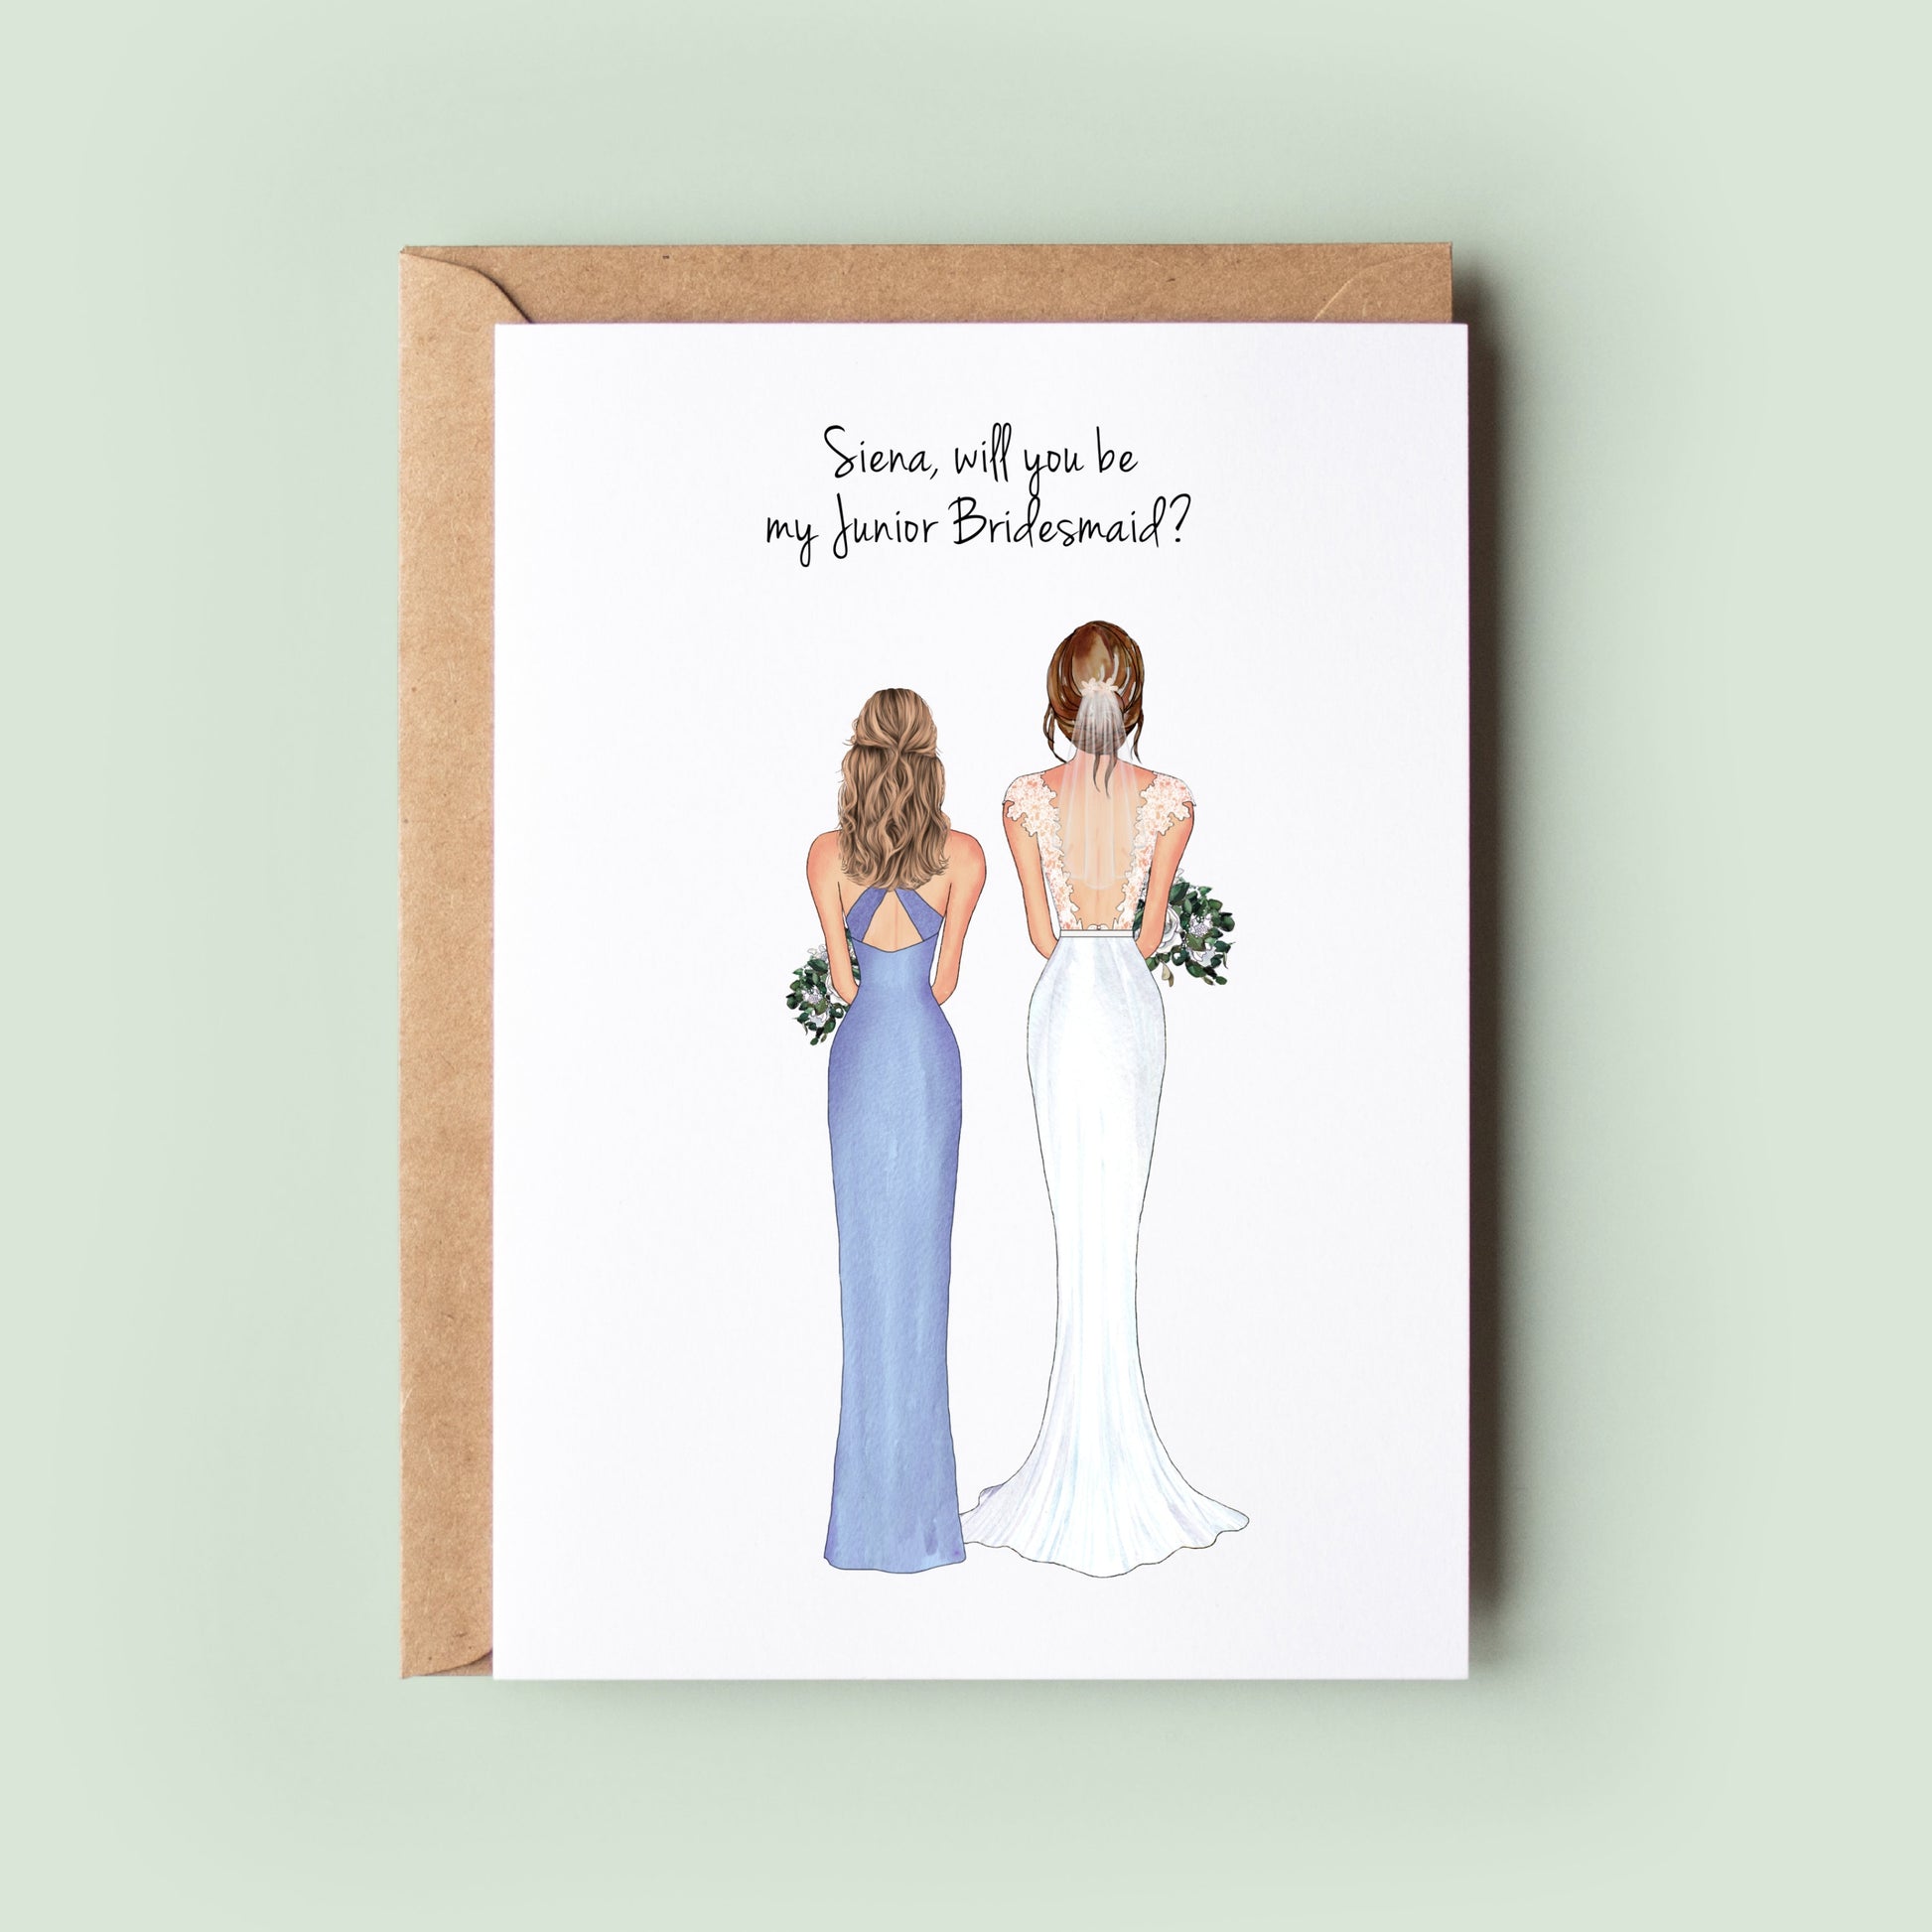 A personalised card for proposing to junior bridesmaid or mini maid of honor.